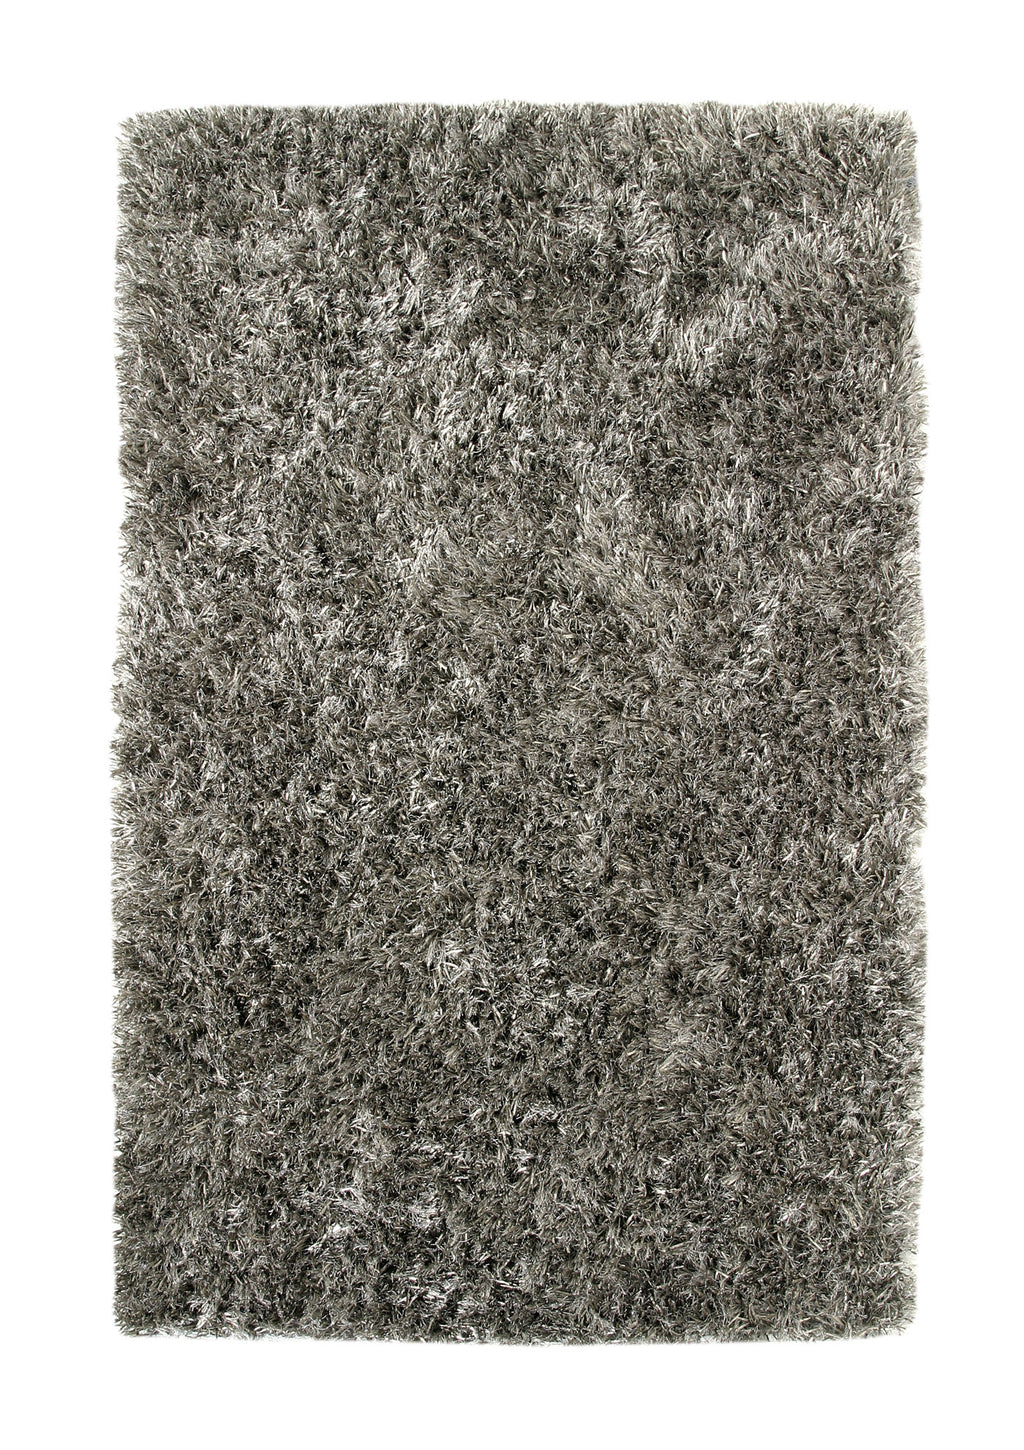 Dynamic Rugs Romance 2600 Mineral Area Rug main image